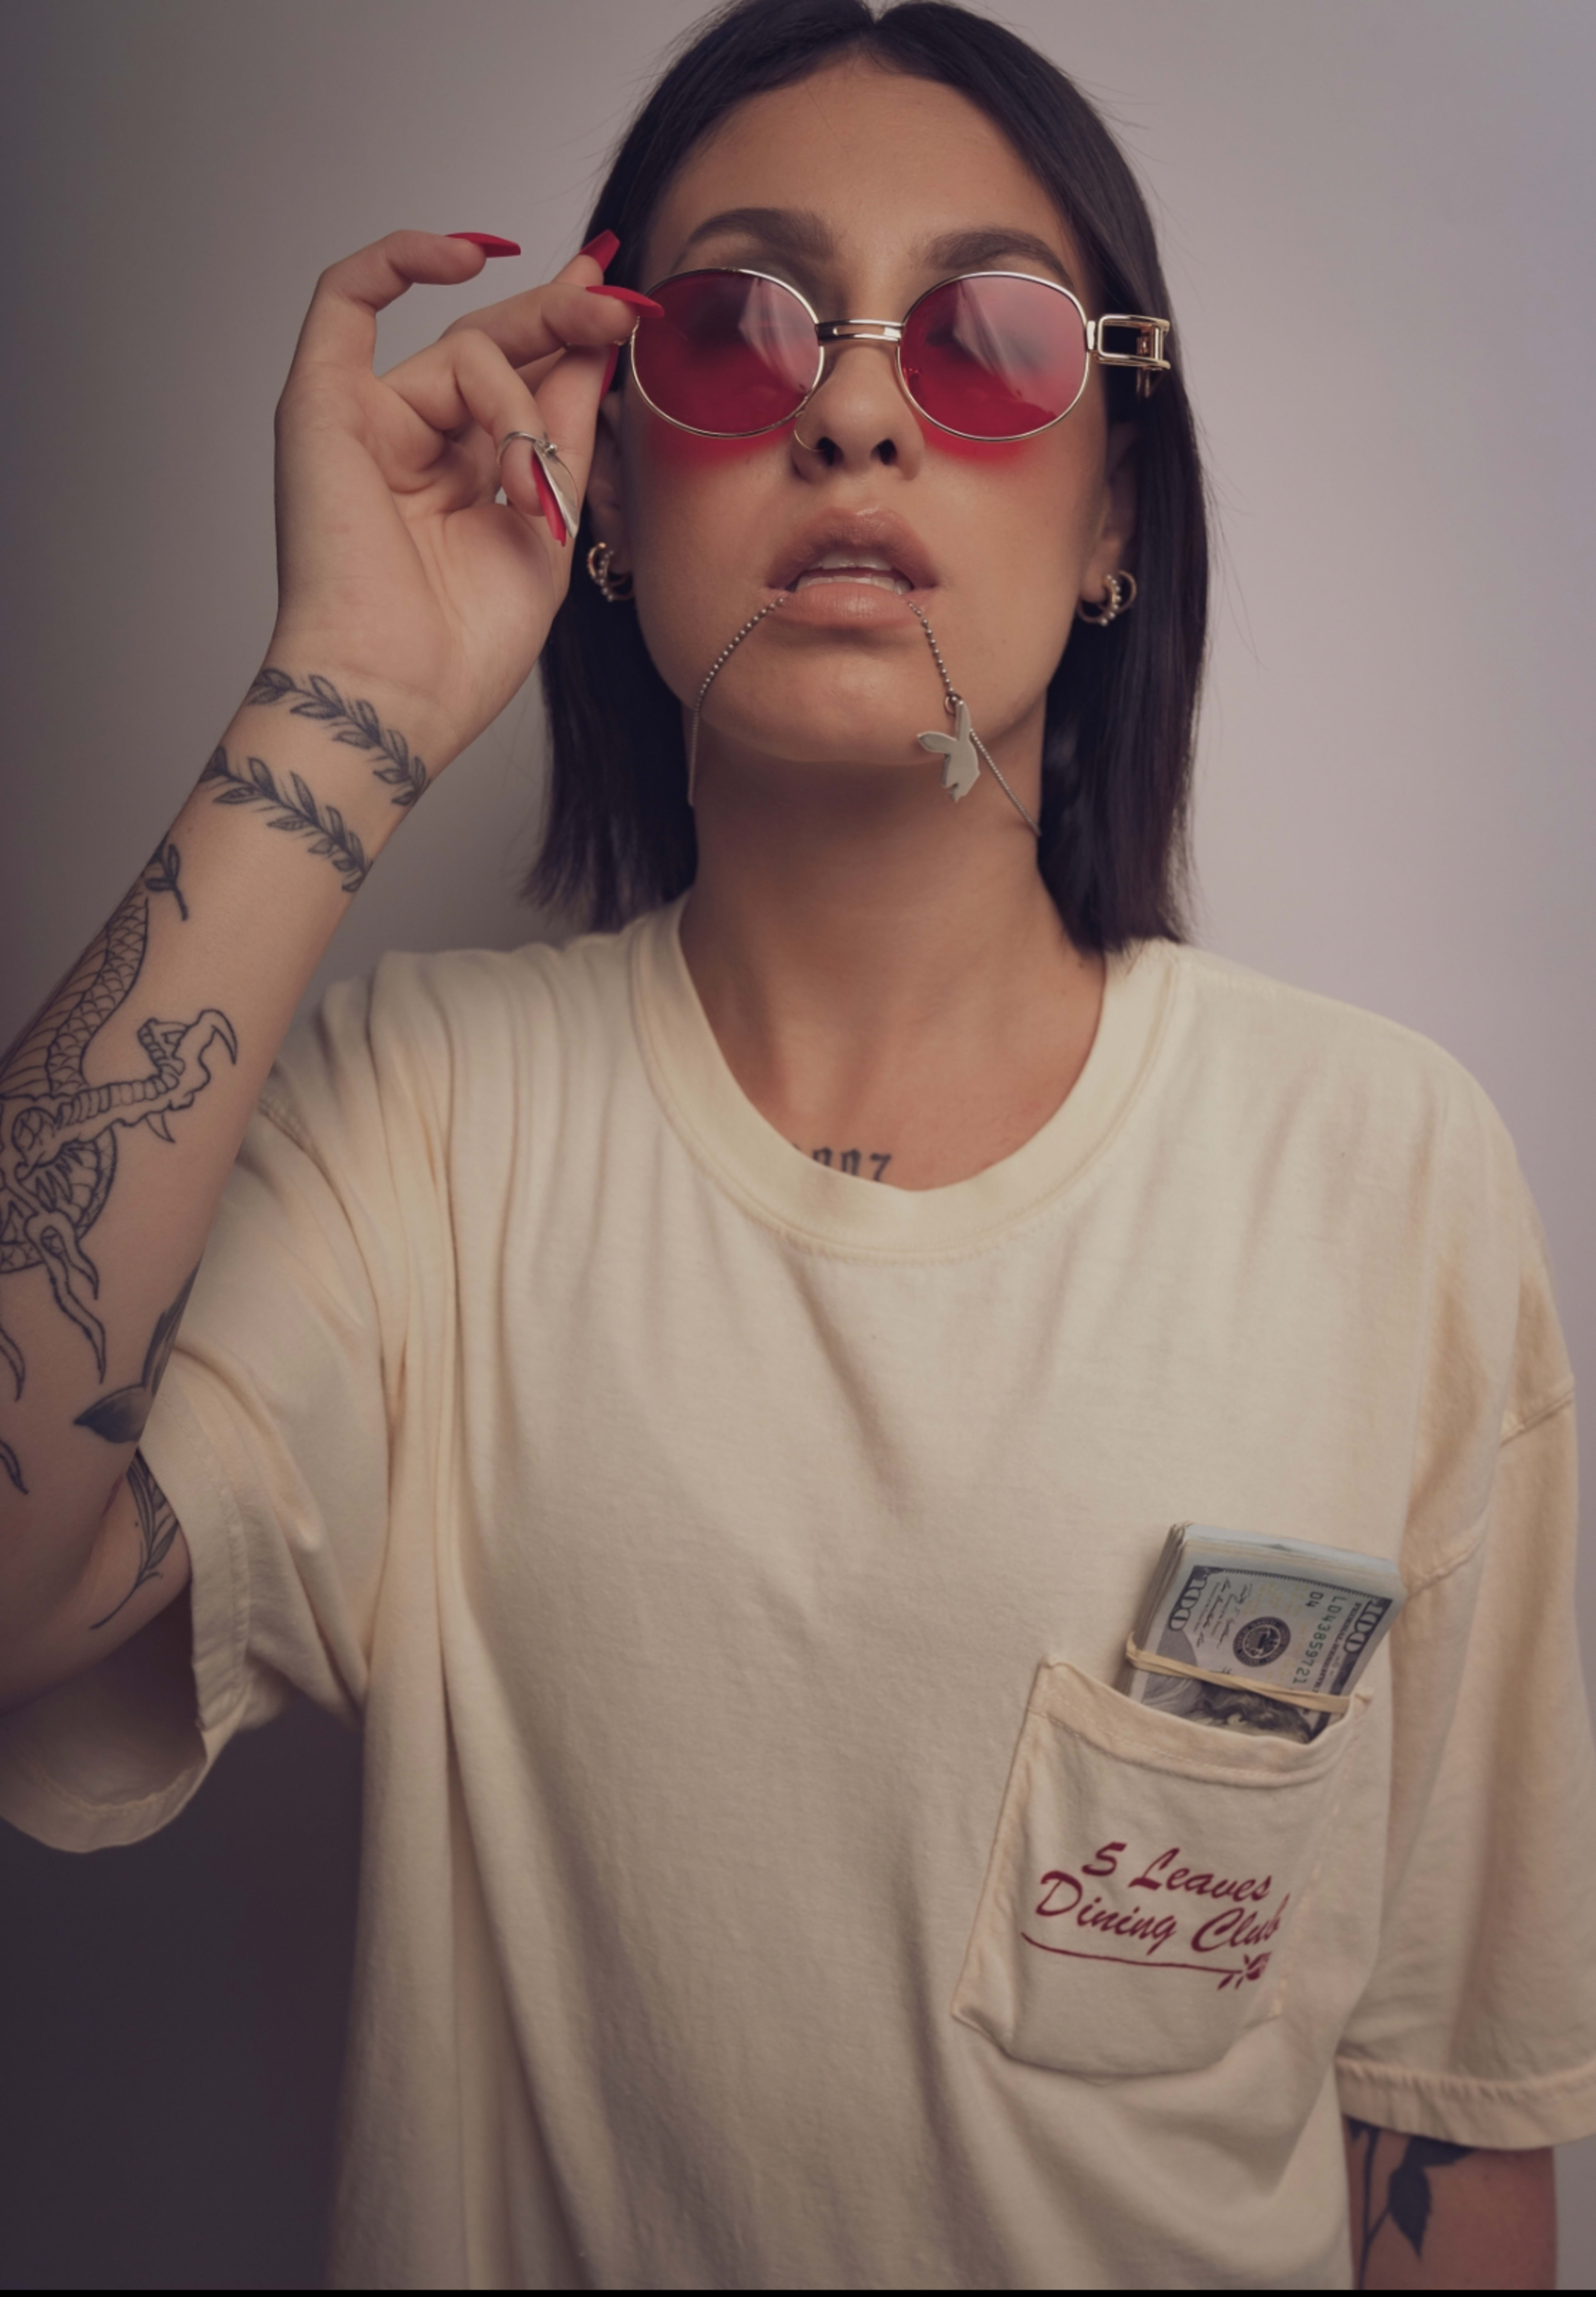 A fashion model with tattoos in a white shirt and red glasses with money posing for a photo shoot.